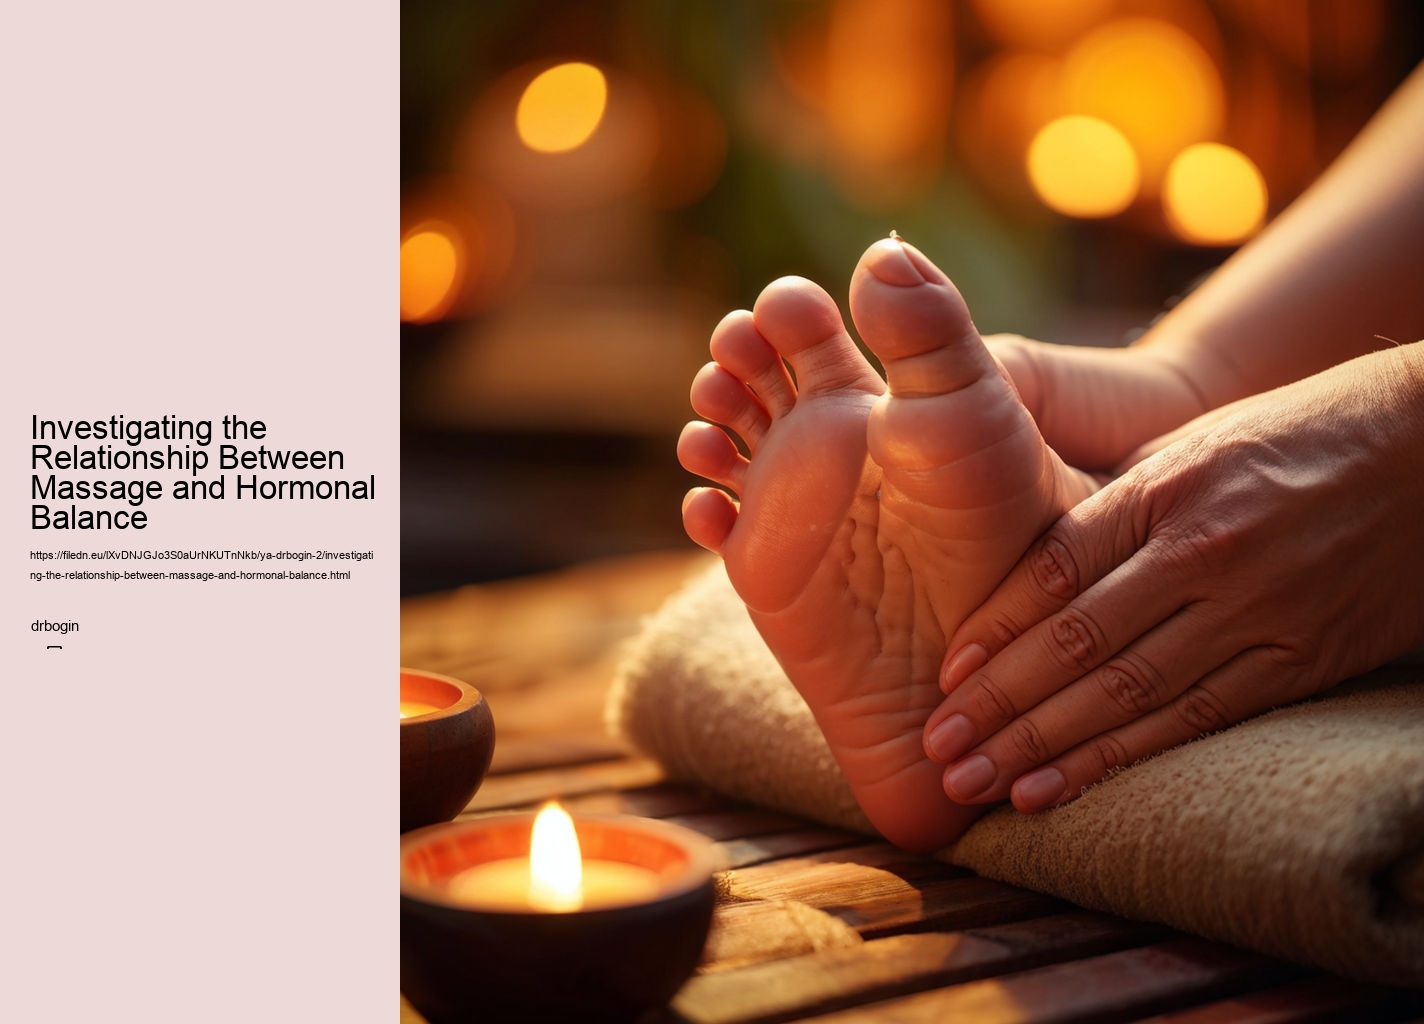 Investigating the Relationship Between Massage and Hormonal Balance